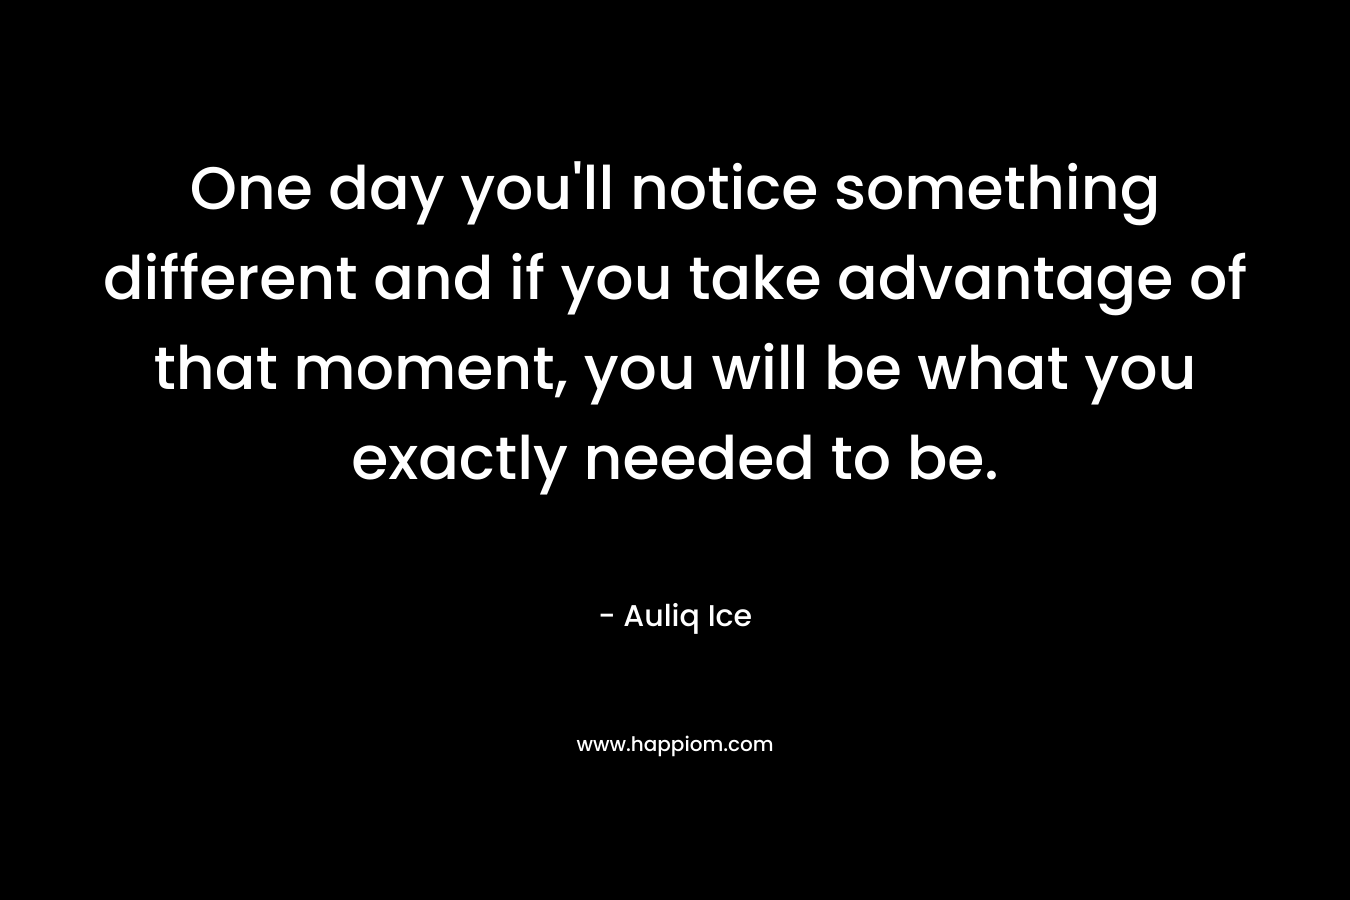 One day you'll notice something different and if you take advantage of that moment, you will be what you exactly needed to be.